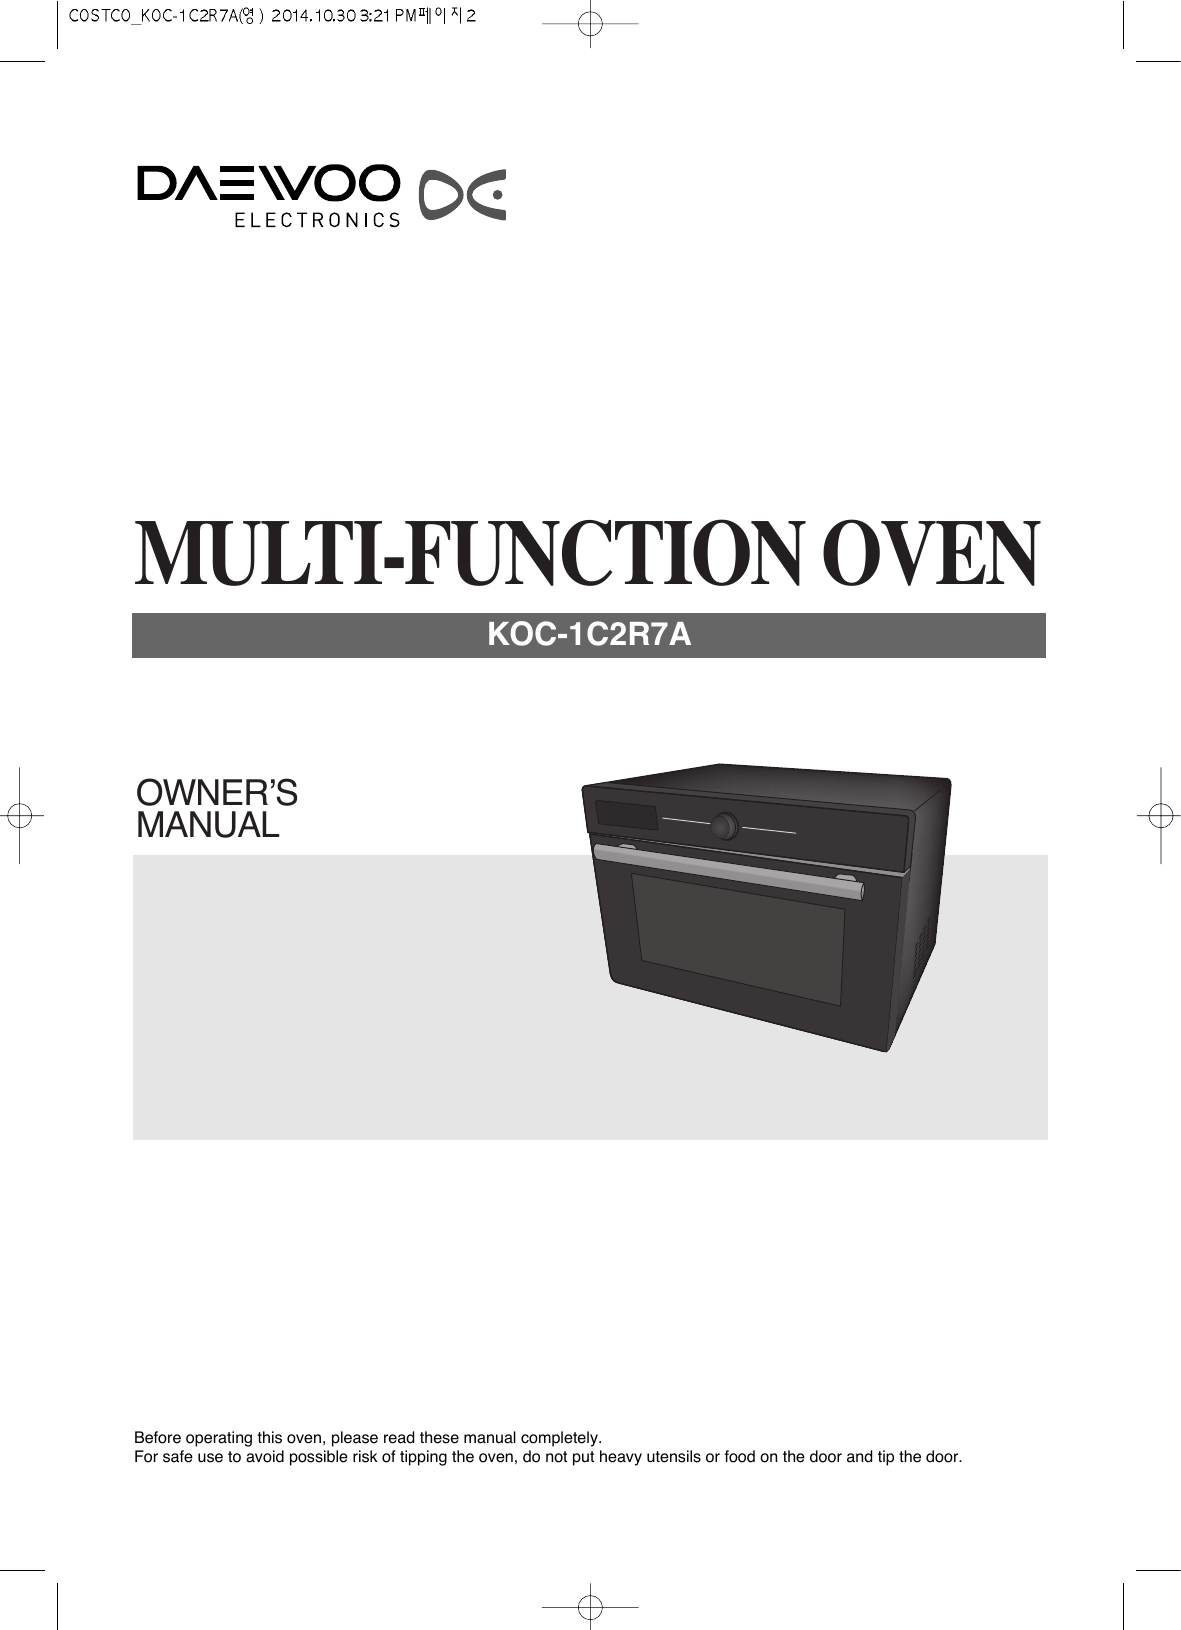 OWNER’SMANUALMULTI-FUNCTION OVENKOC-1C2R7ABefore operating this oven, please read these manual completely.For safe use to avoid possible risk of tipping the oven, do not put heavy utensils or food on the door and tip the door.